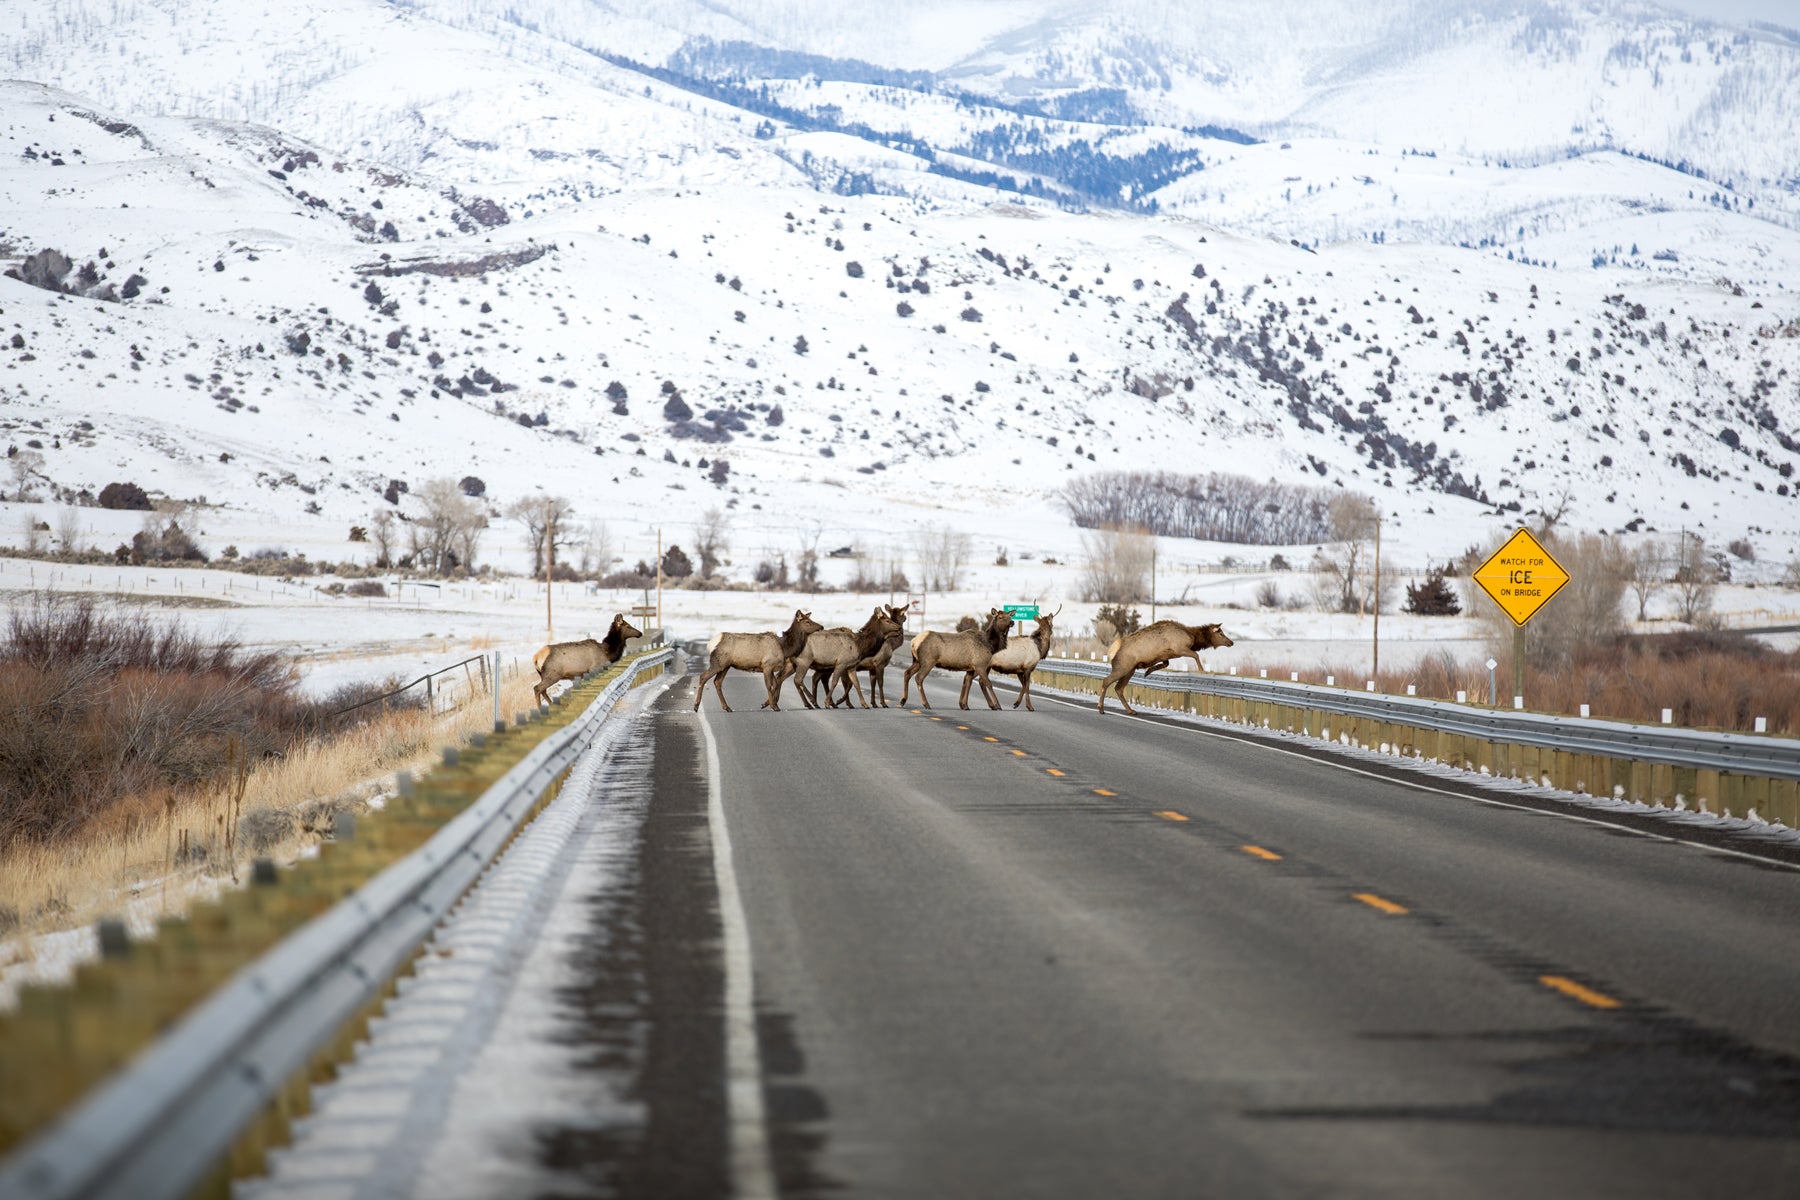 Elk herd crossing the road in front of snowy mountains in Paradise Valley.